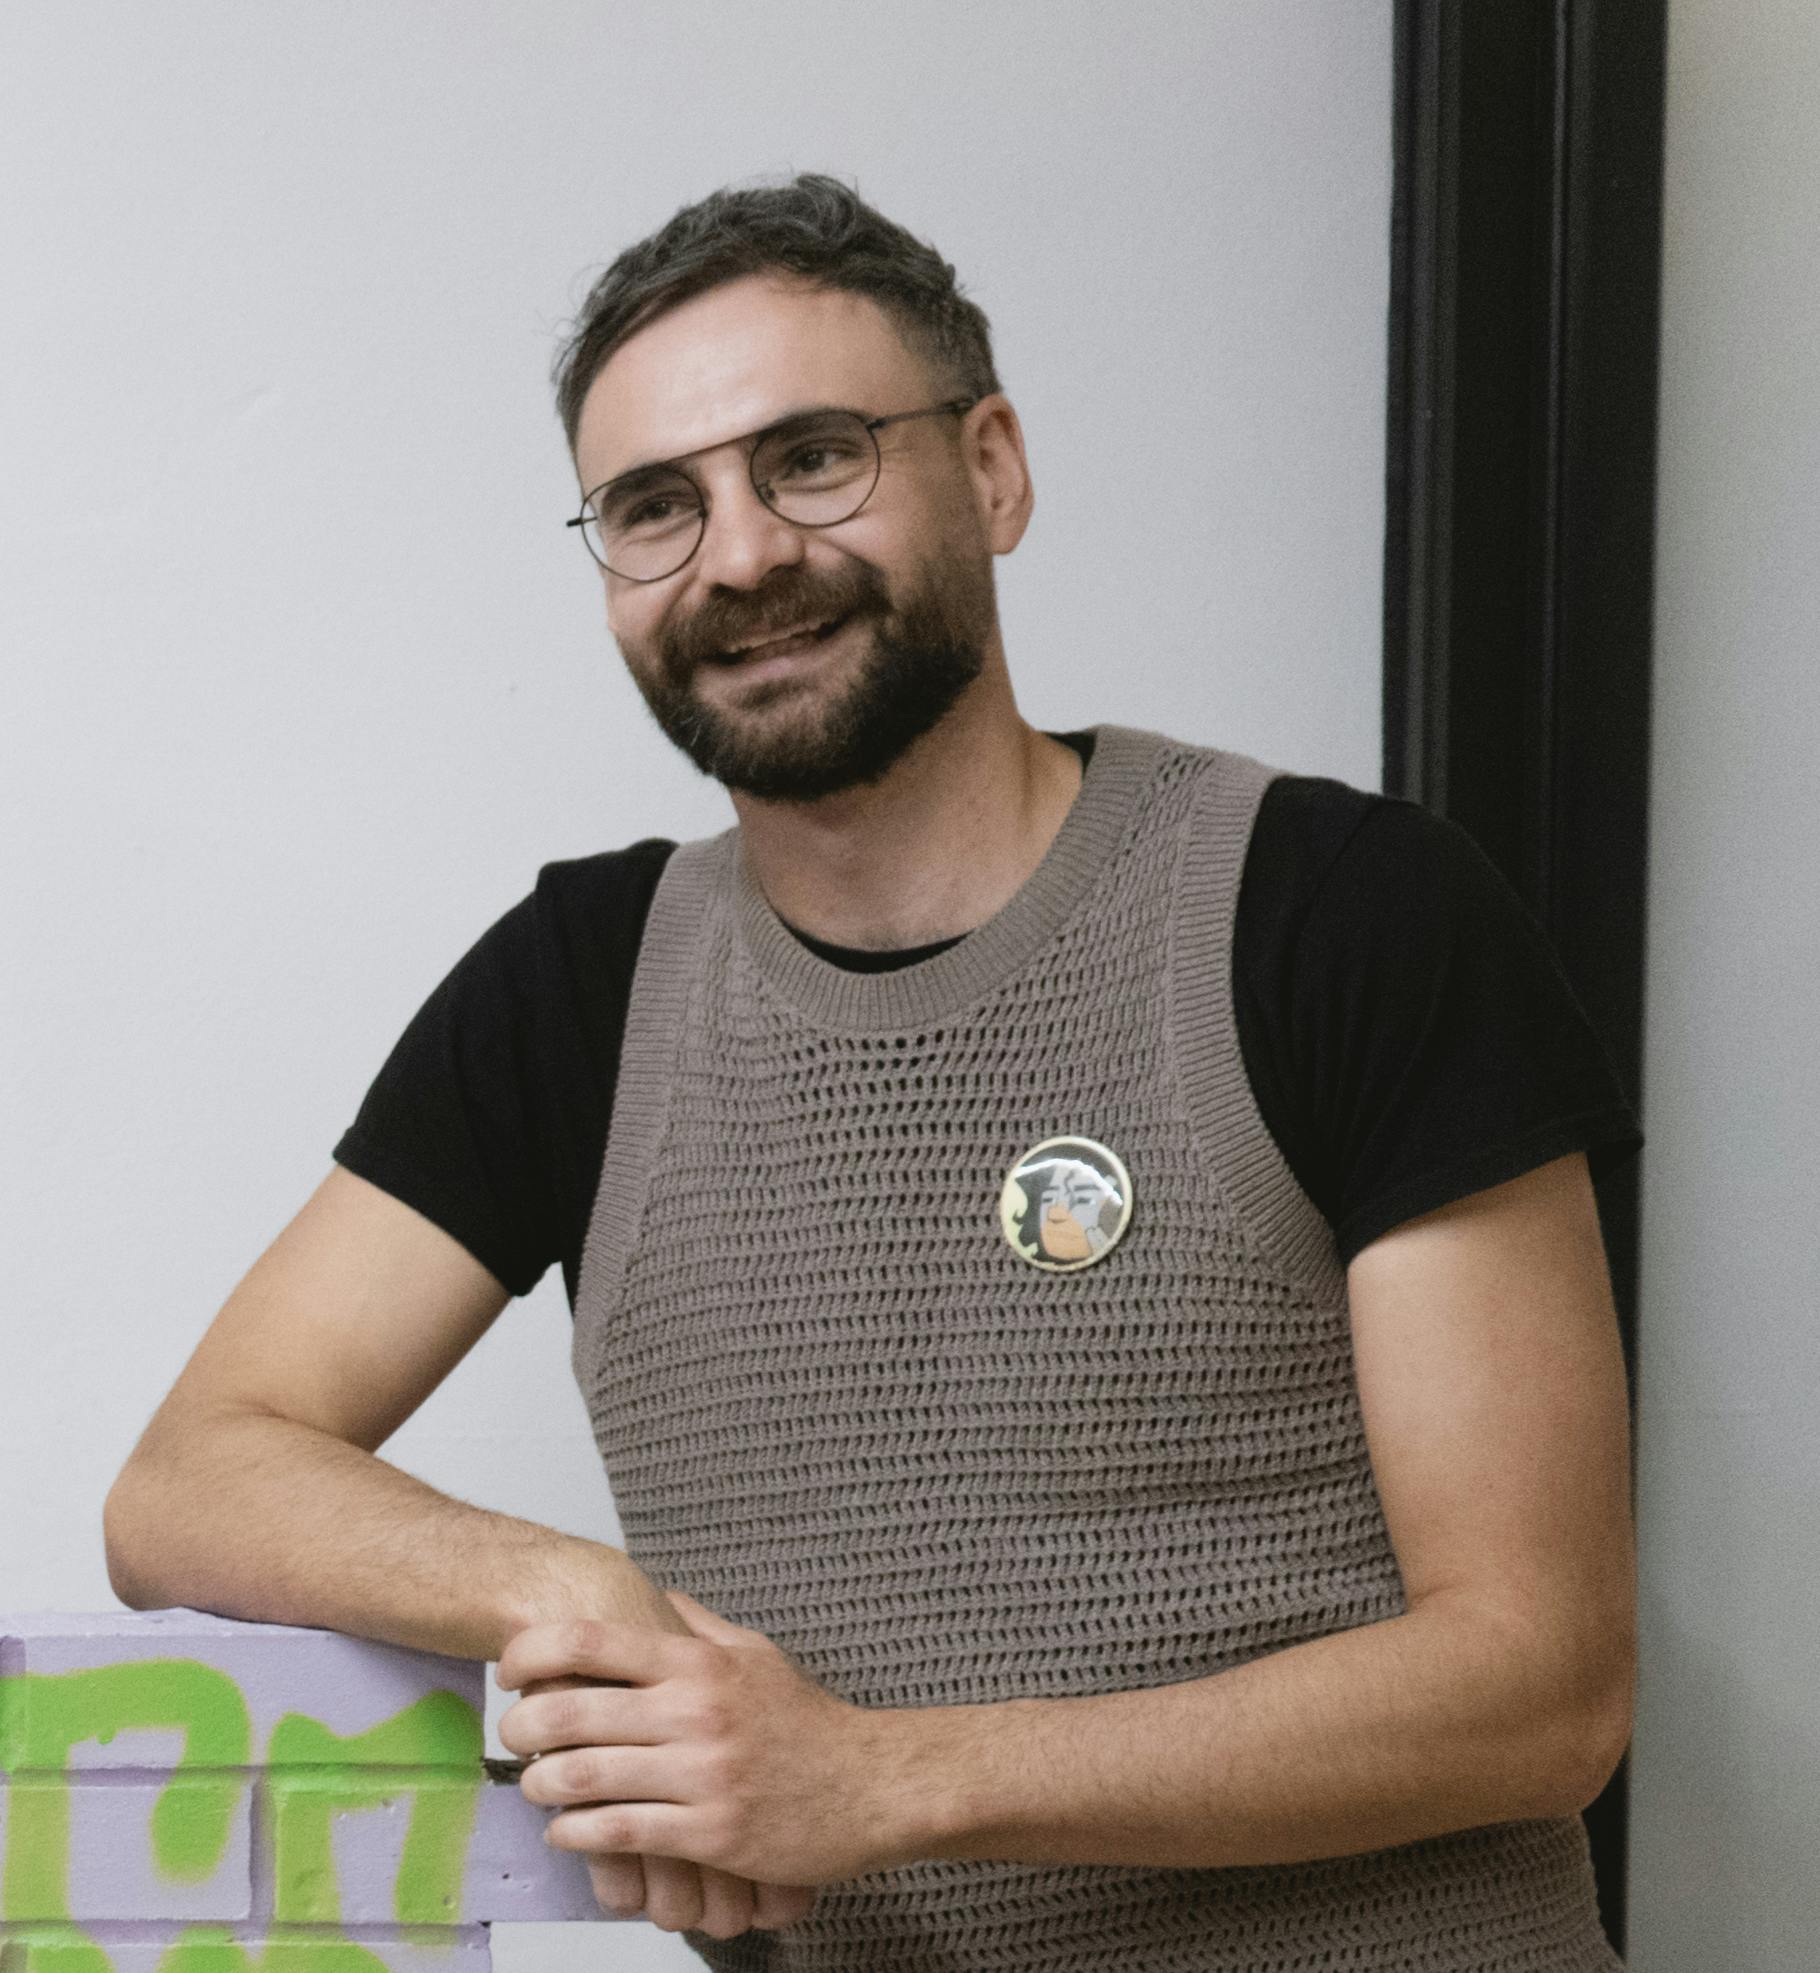 Ryan Von Hagen smiling and looking just off camera. Ryan has short brown hair, a beard and moustache (close-cut), wears round-rimmed glasses, and is wearing a black t shirt with a taupe knit vest overtop. He is leaning on a wall. 